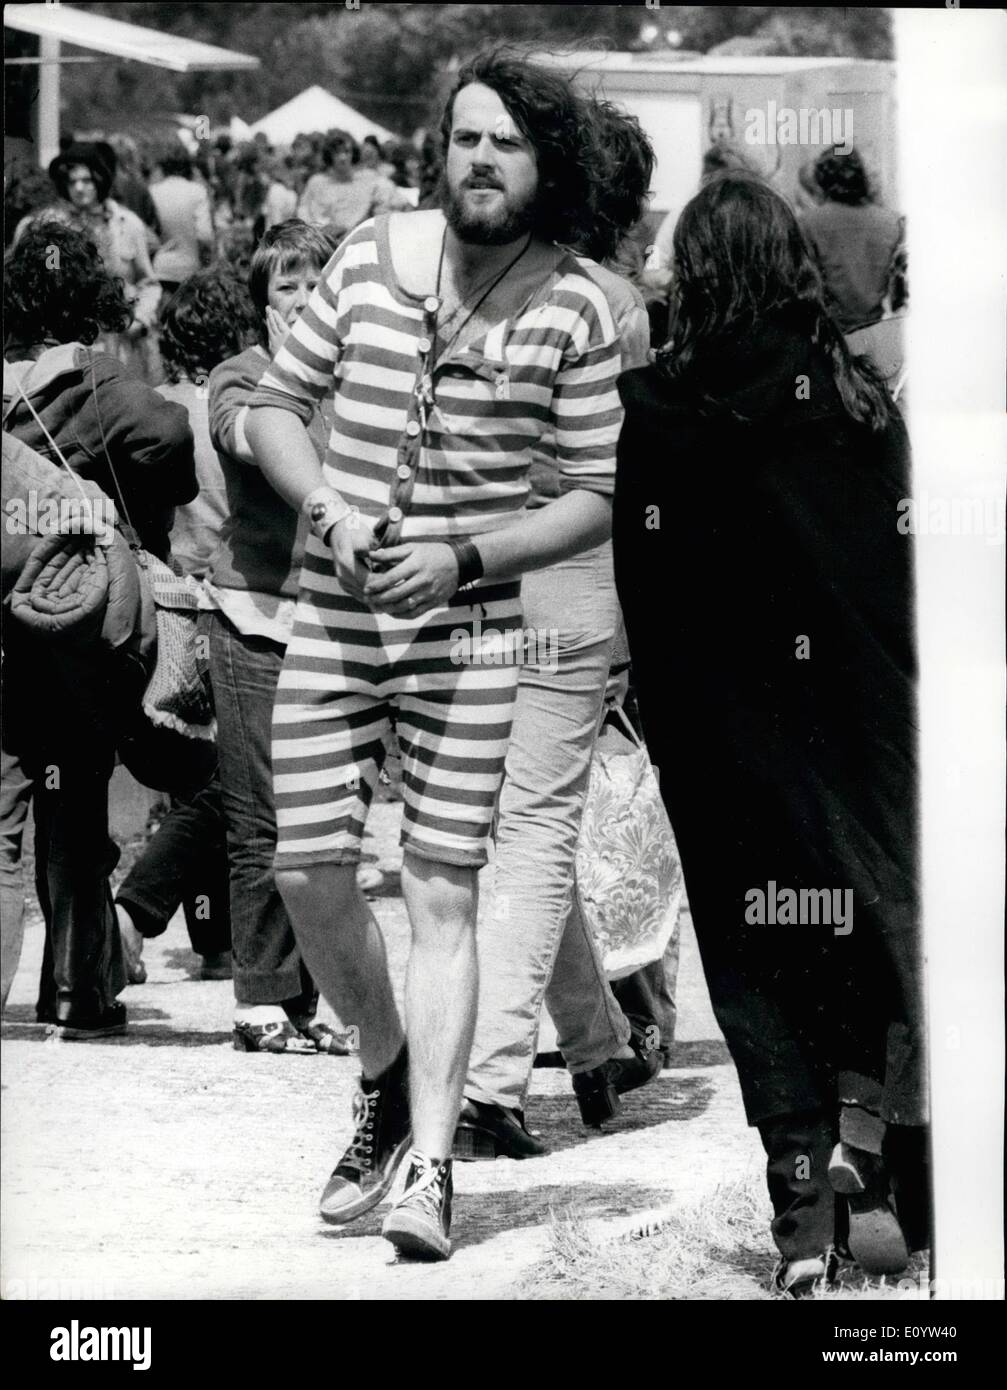 Jun. 27, 1971 - June 27th, 1971 Ã¢â‚¬ËœHippie' Police seize 100 pop fans at a Pop Festival in Reading. Detectives in hippie gear searched hundreds of teenagers for drugs at the Reading Pop Festival yesterday. More than 100 fans were arrested. It was estimated that some 20,000 fans camped out despite the heavy rain. Photo Shows: One of the pop fans dressed in an old fashioned bathing suit at the Pop Festival yesterday. Stock Photo